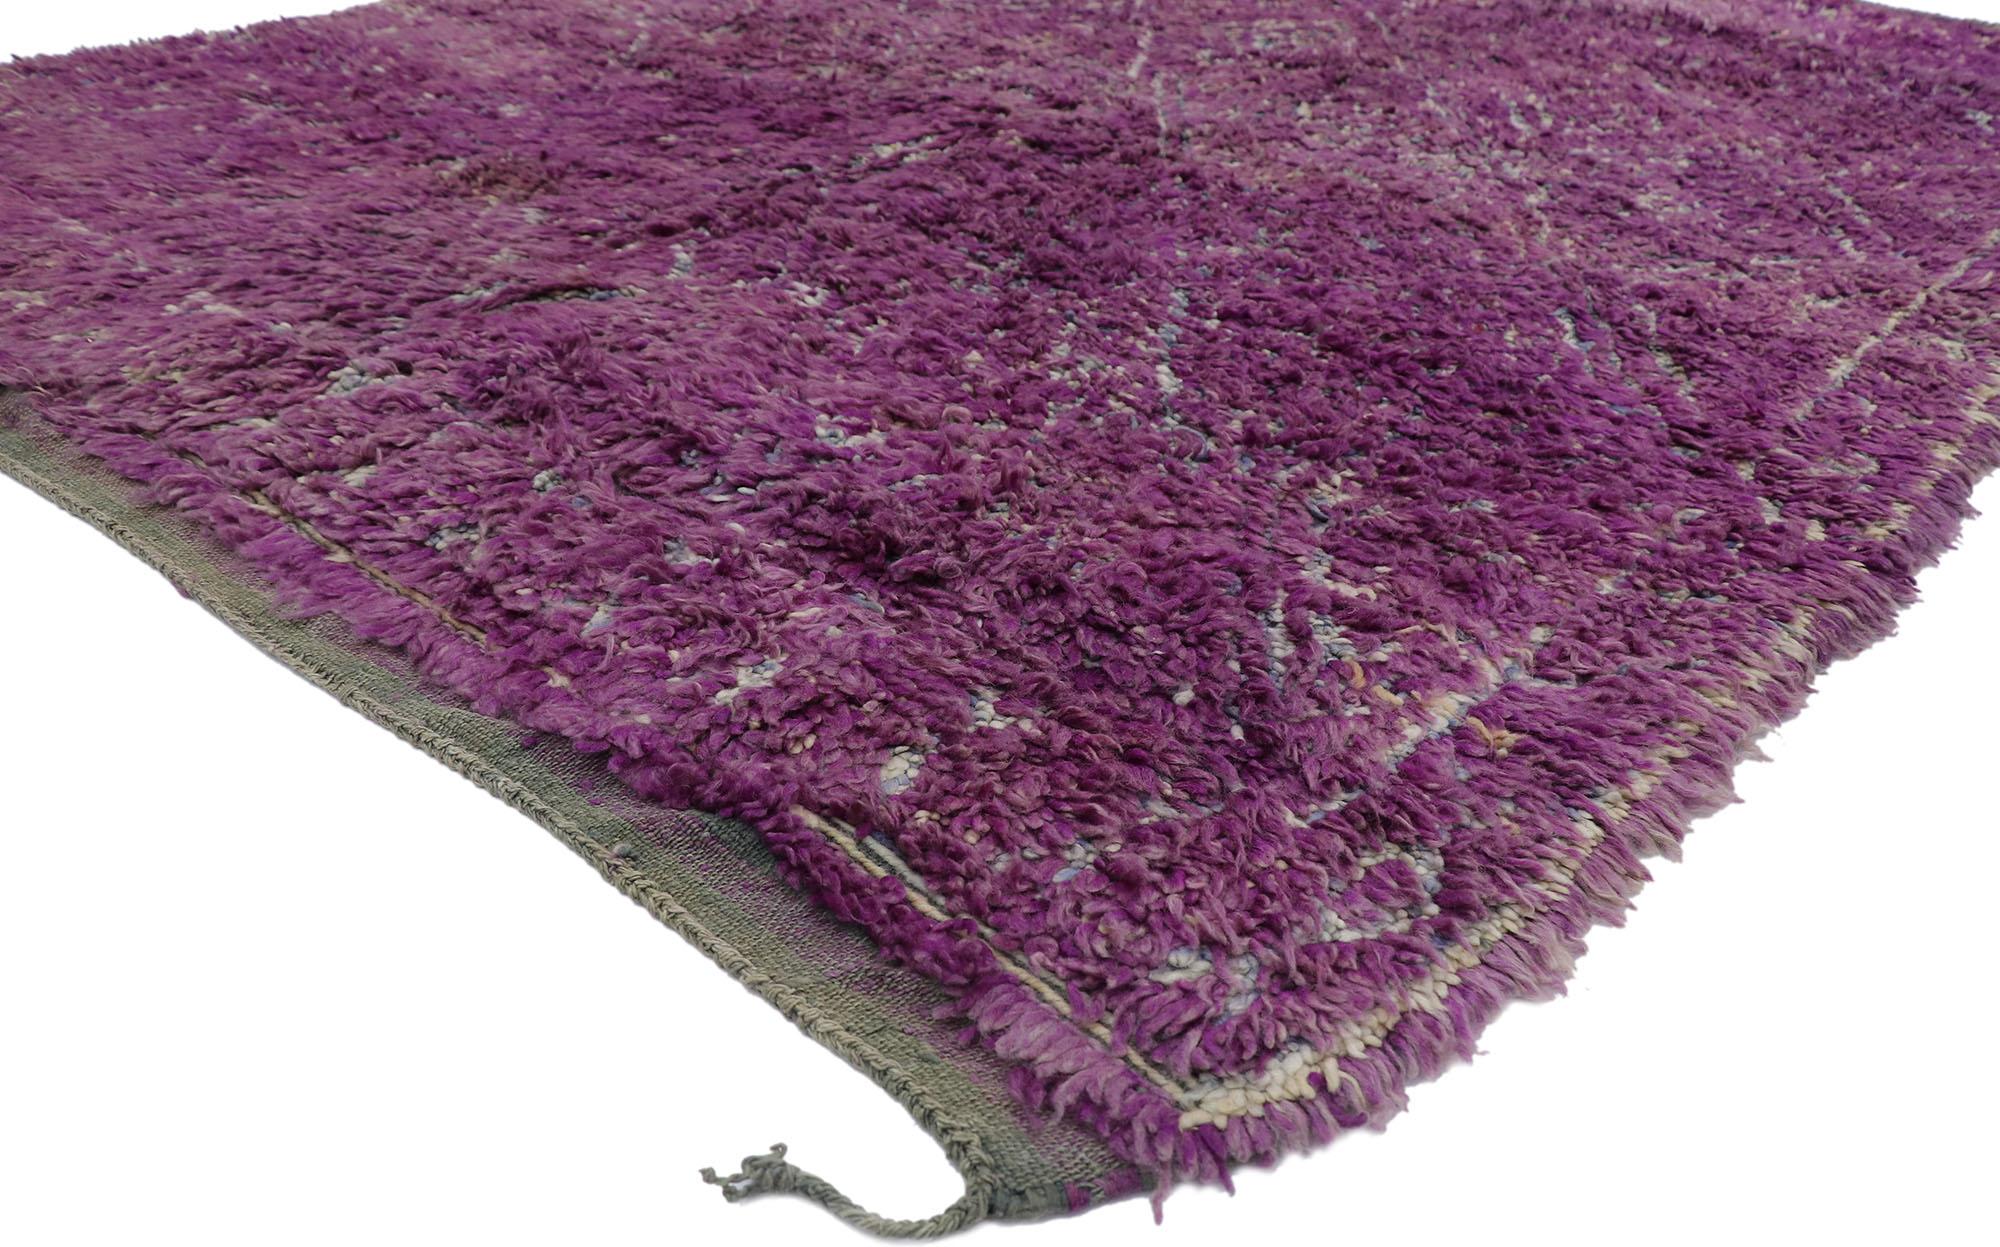 21453 vintage Purple Beni M'Guild Moroccan rug with Bohemian style 06'08 x 08'08. Showcasing a bold expressive design, incredible detail and texture, this hand knotted wool vintage Berber Beni M'Guild Moroccan rug is a captivating vision of woven